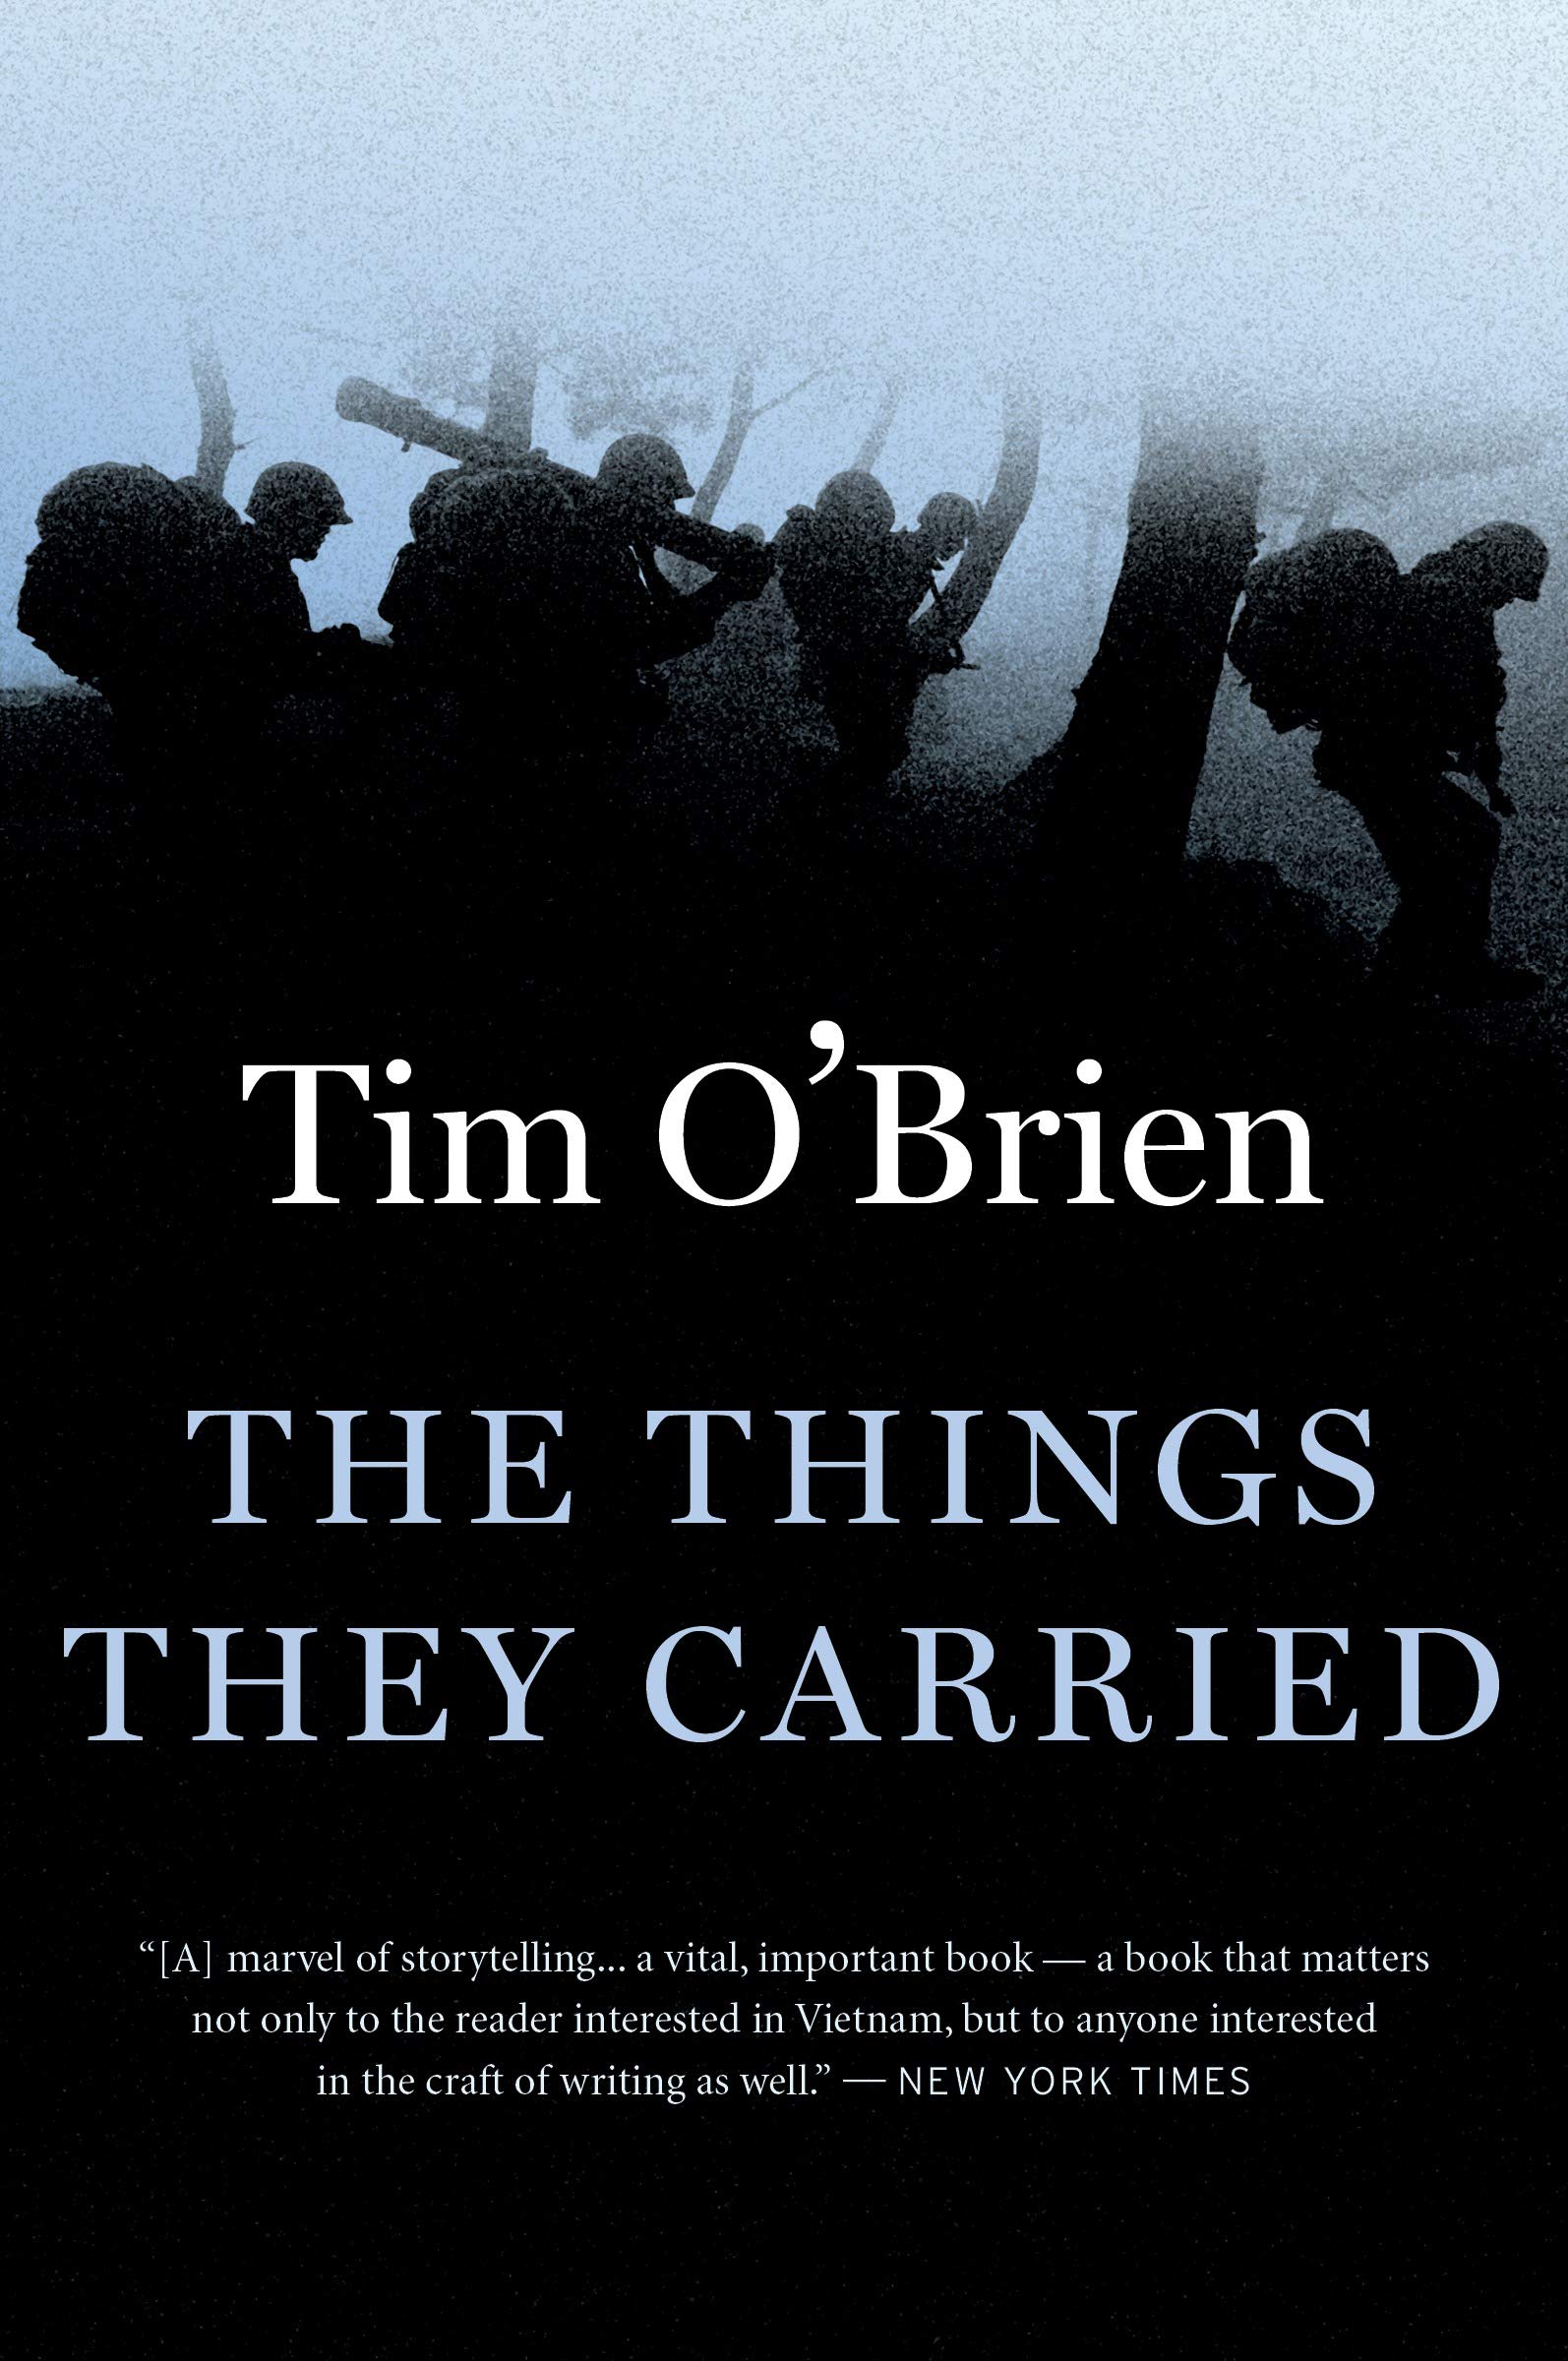 Image for "The Things They Carried"